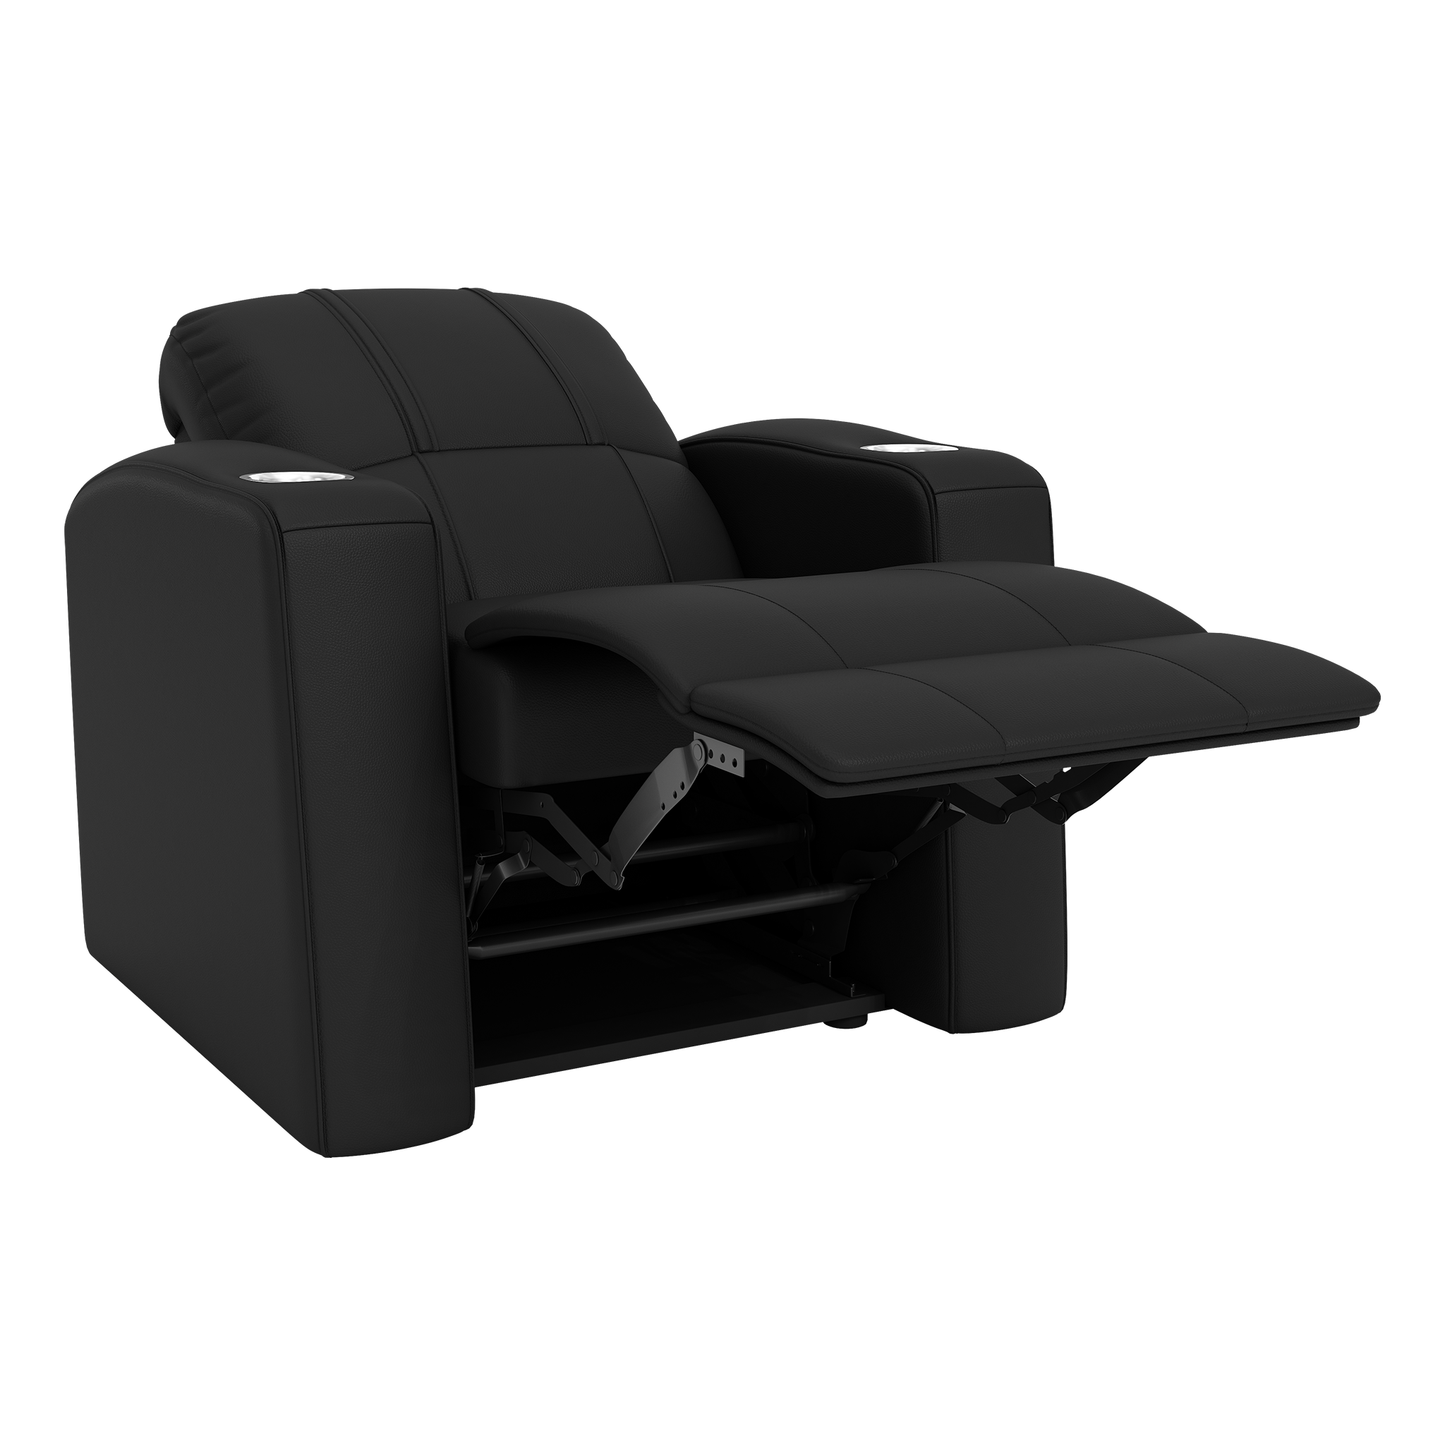 Relax Home Theater Recliner with San Francisco Giants Secondary